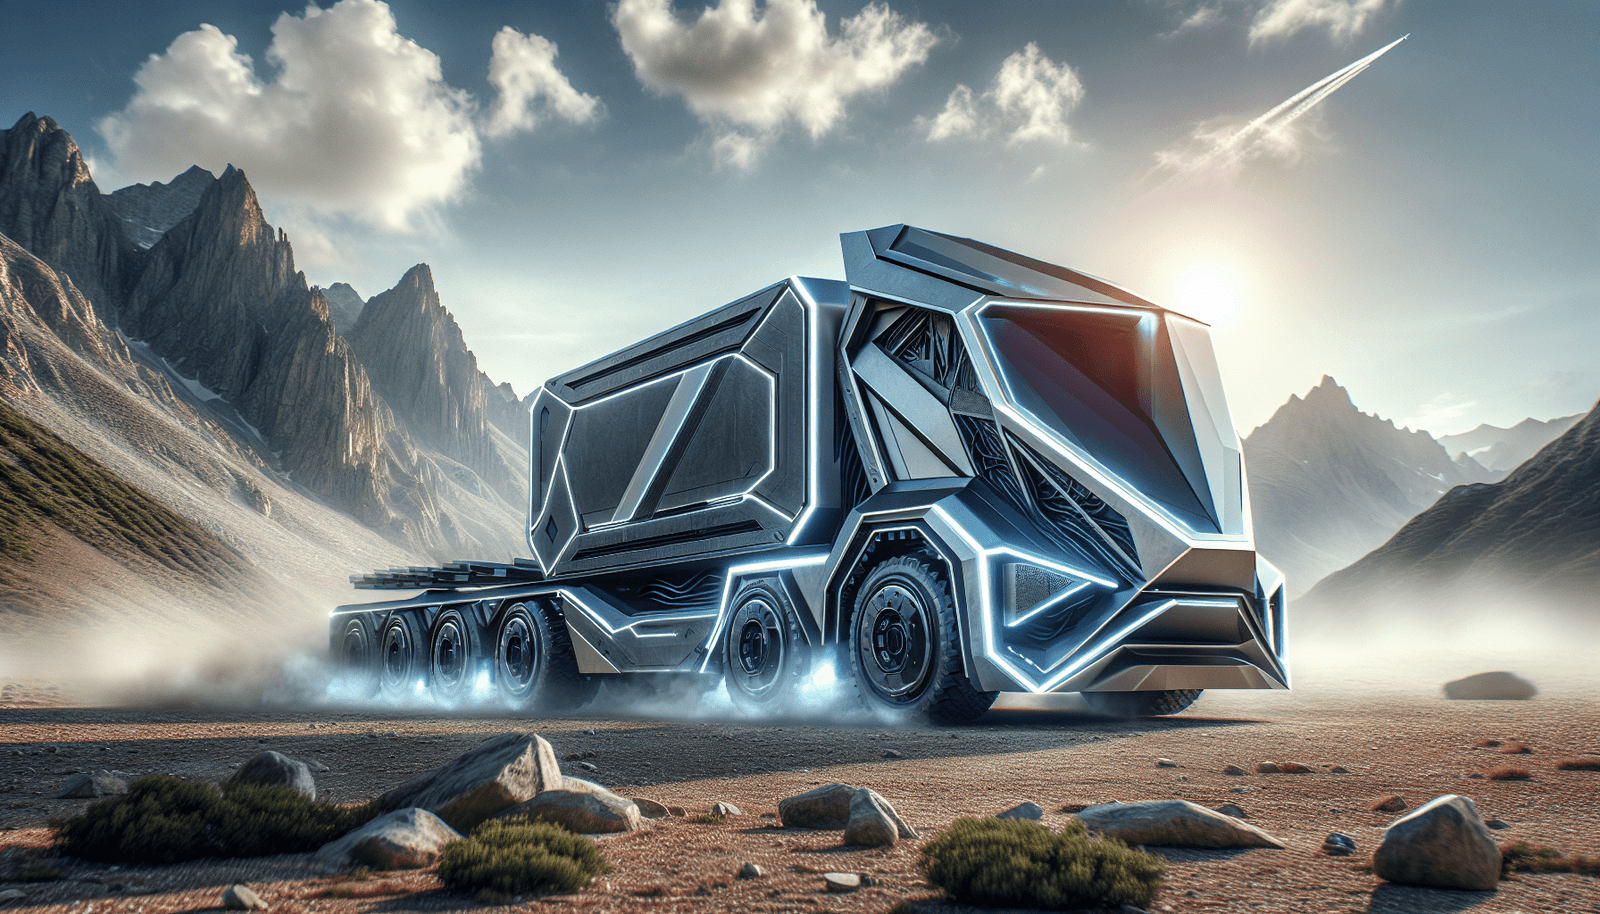 Does The Tesla Cybertruck Offer A Towing Capacity, And If So, How Much Weight Can It Tow?